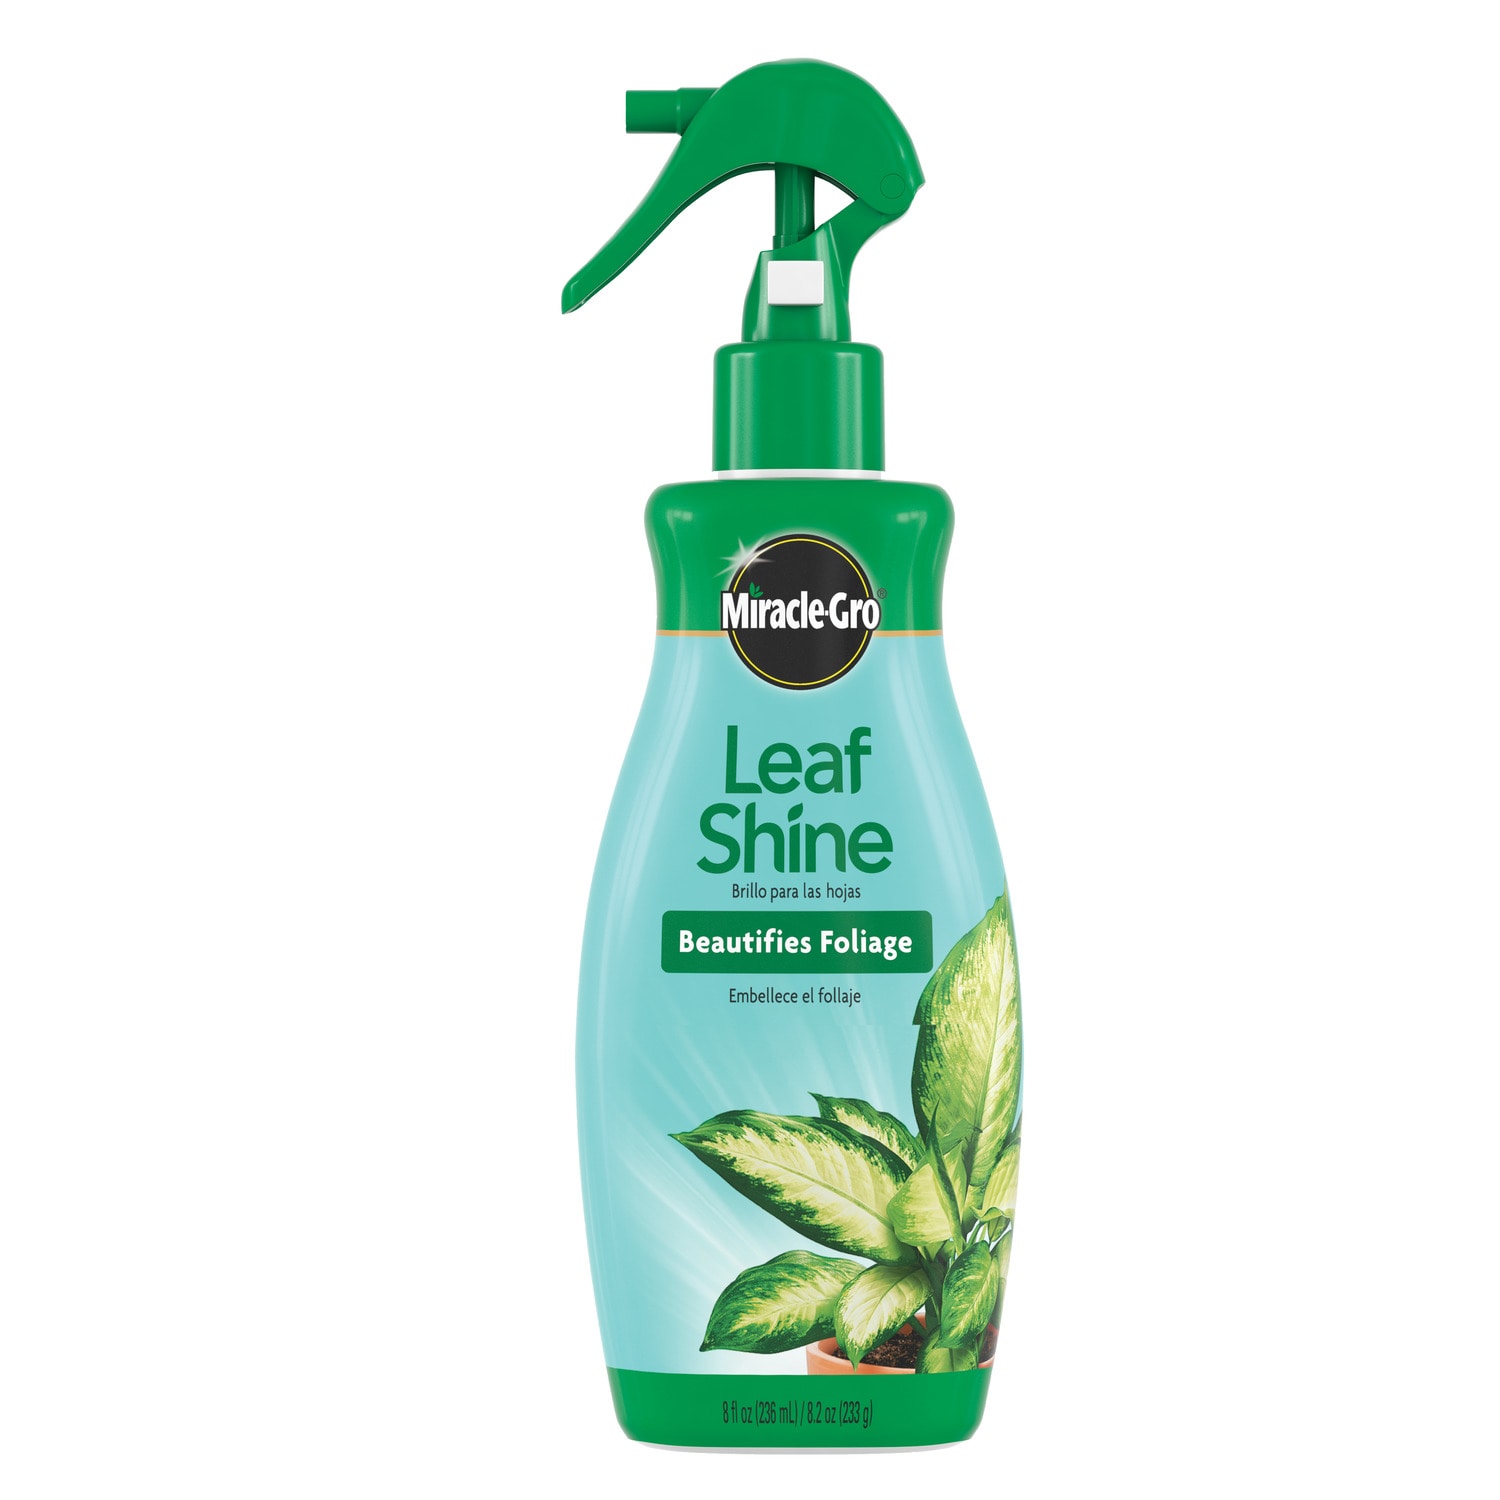 Miracle-Gro 8-fl oz Leaf Shine in the Plant Care department at Lowes.com